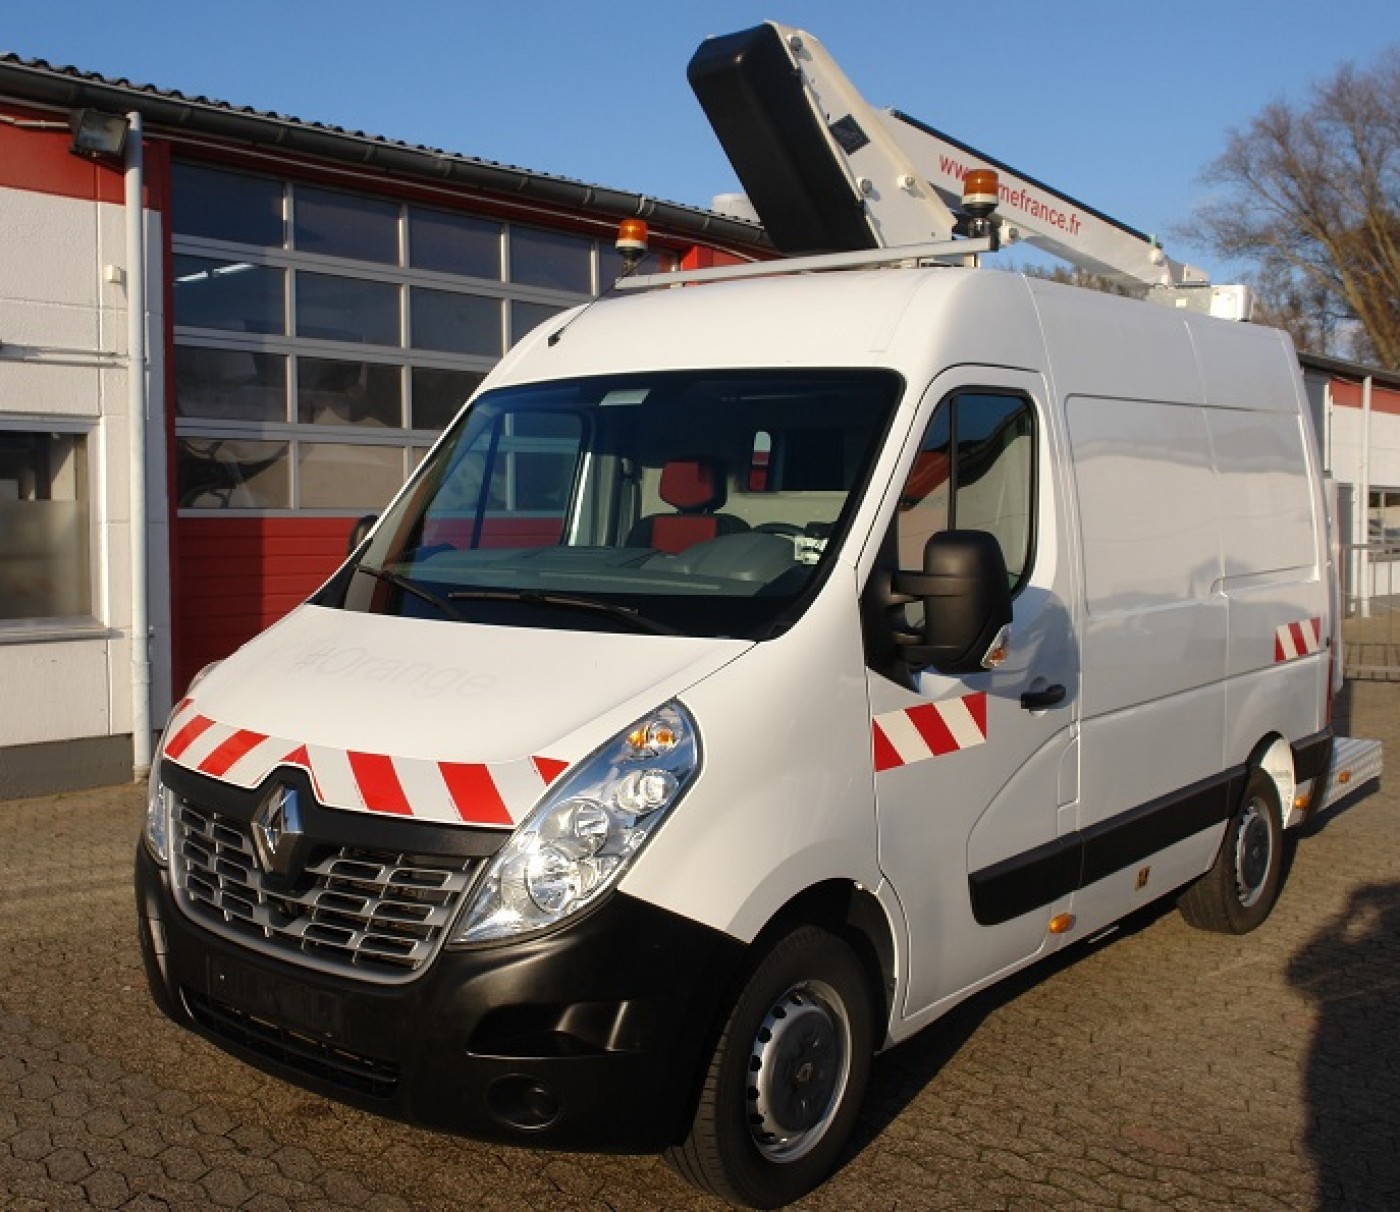  - Master 125dCi Aerial Workplatform TIME FRANCE ETL26 11m 159 operating hours AC ! EURO 6!  As good as new!